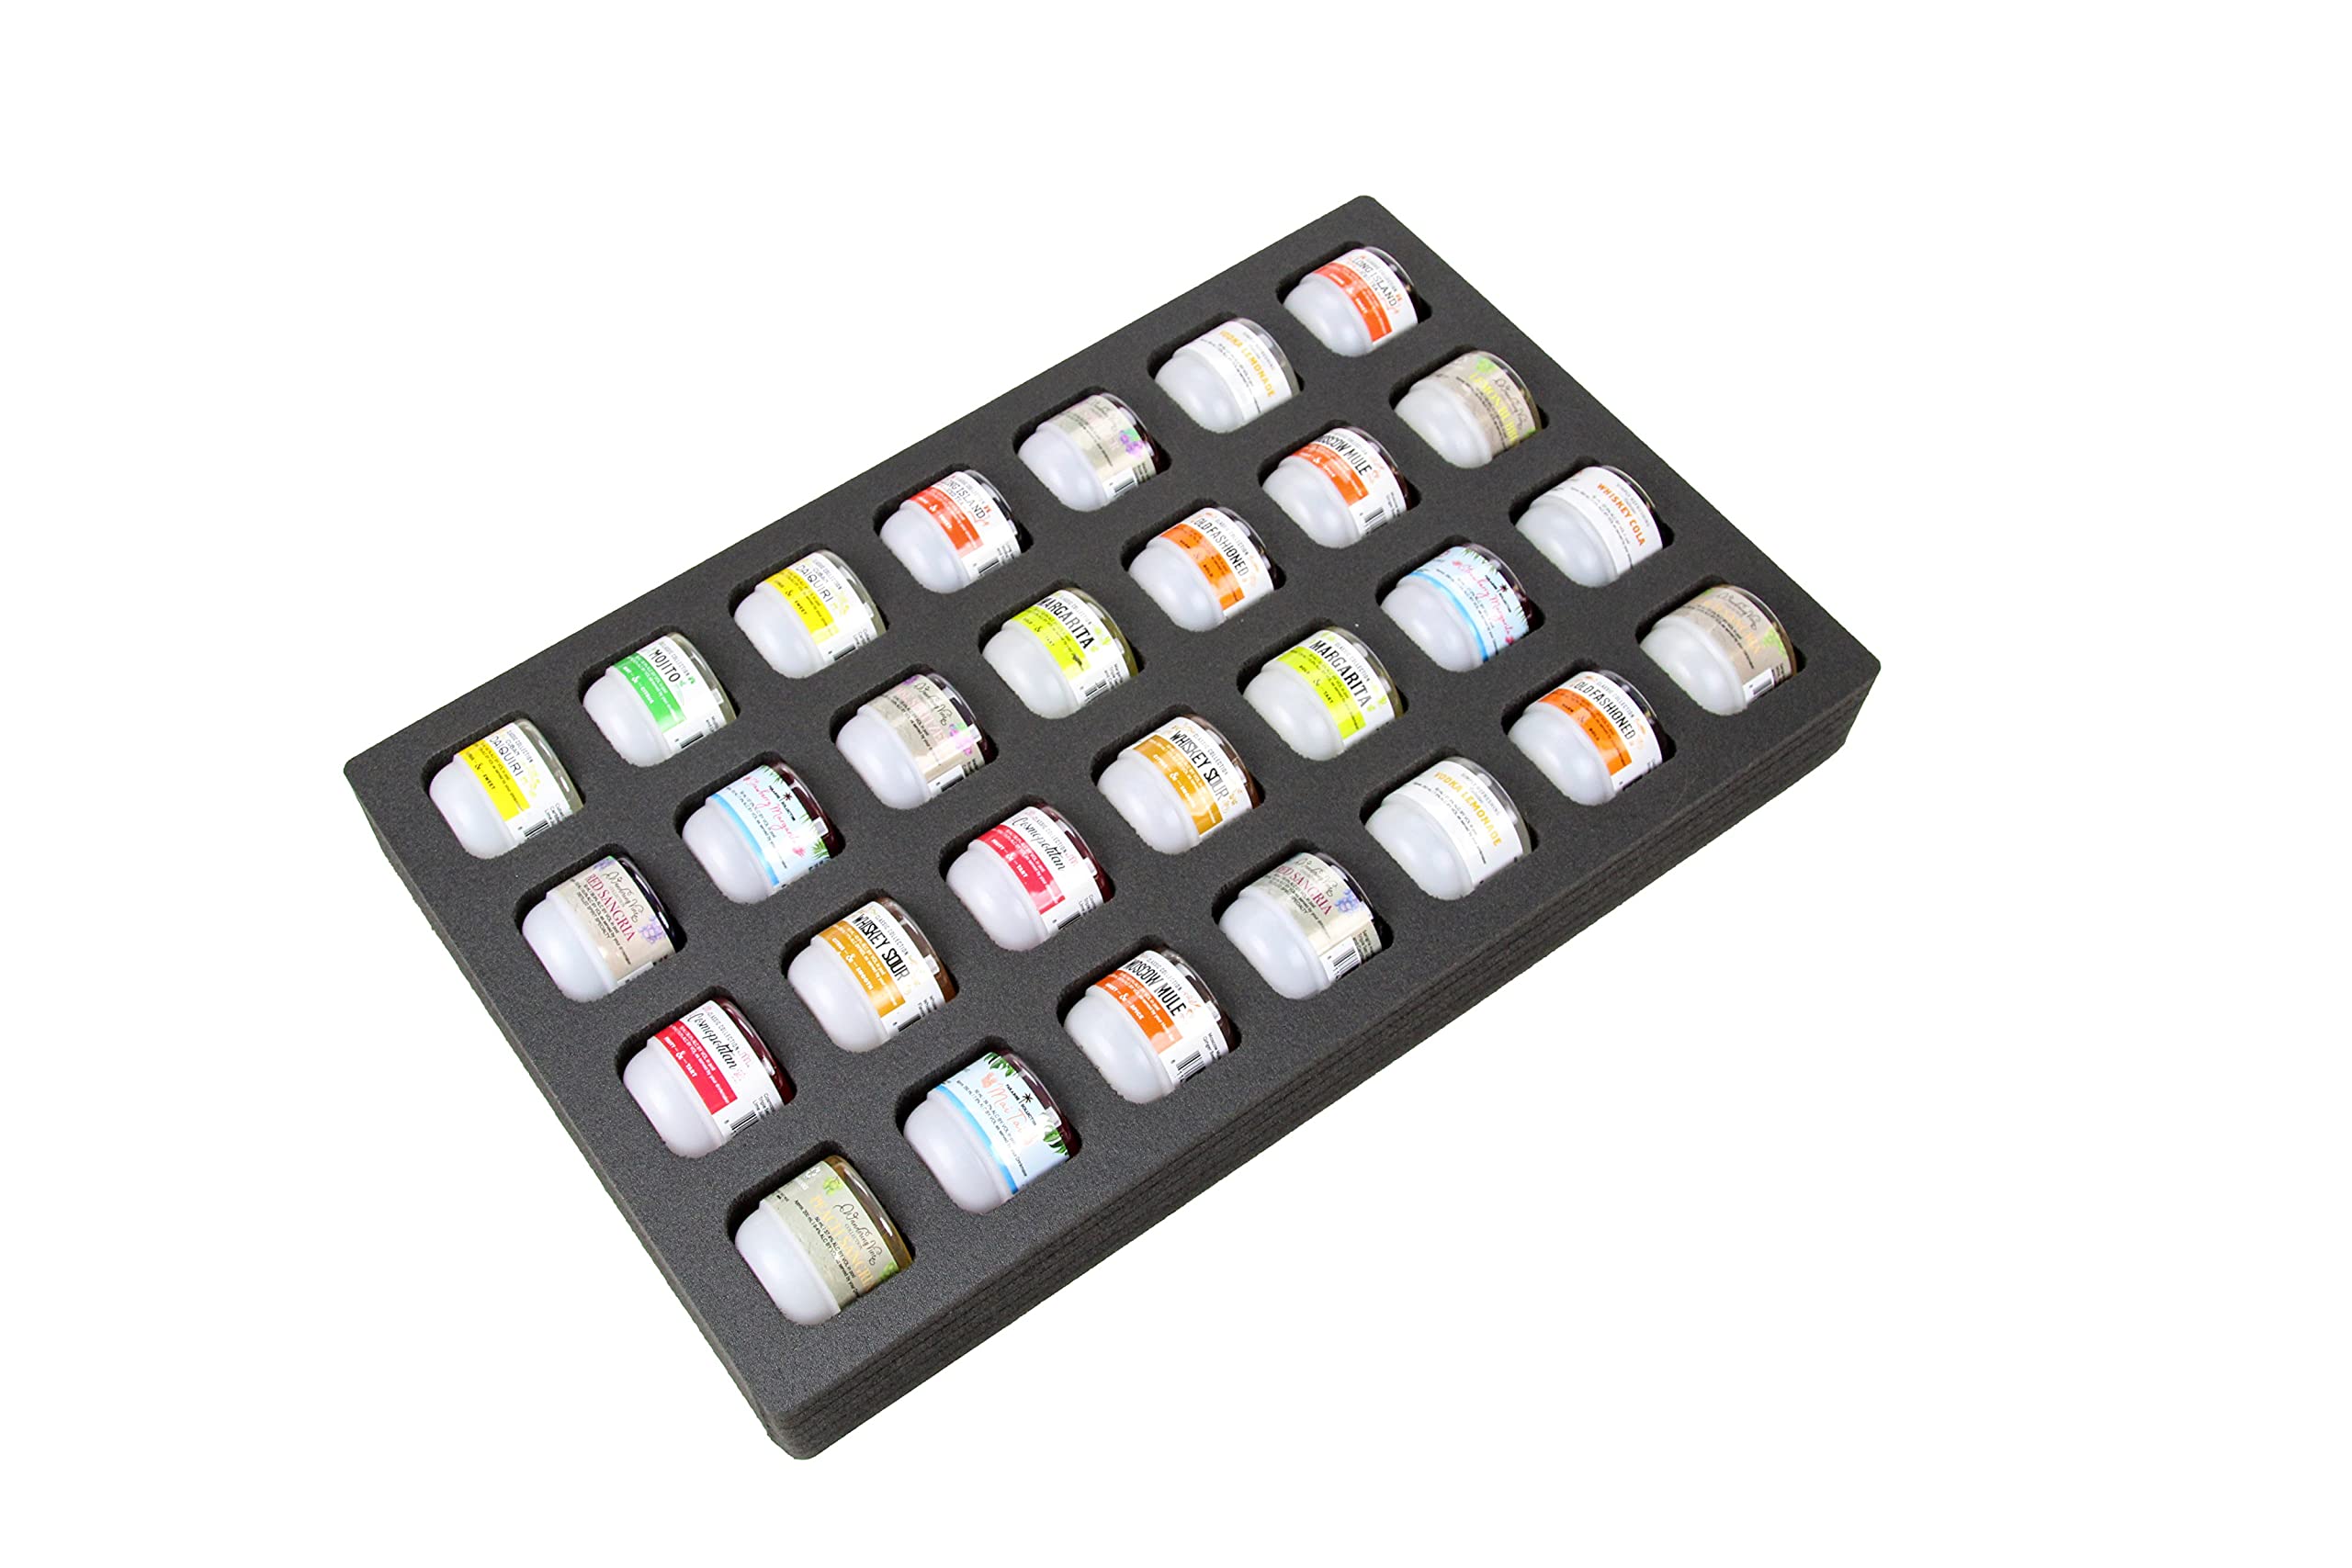 Polar Whale 2 Cocktail Capsule Drawer Organizers Tray Insert Compatible with Keurig DrinkWorks Pods for Kitchen Home Bar Party Waterproof Washable Black Foam 28 Compartment 12.75 x 20.25 Inches